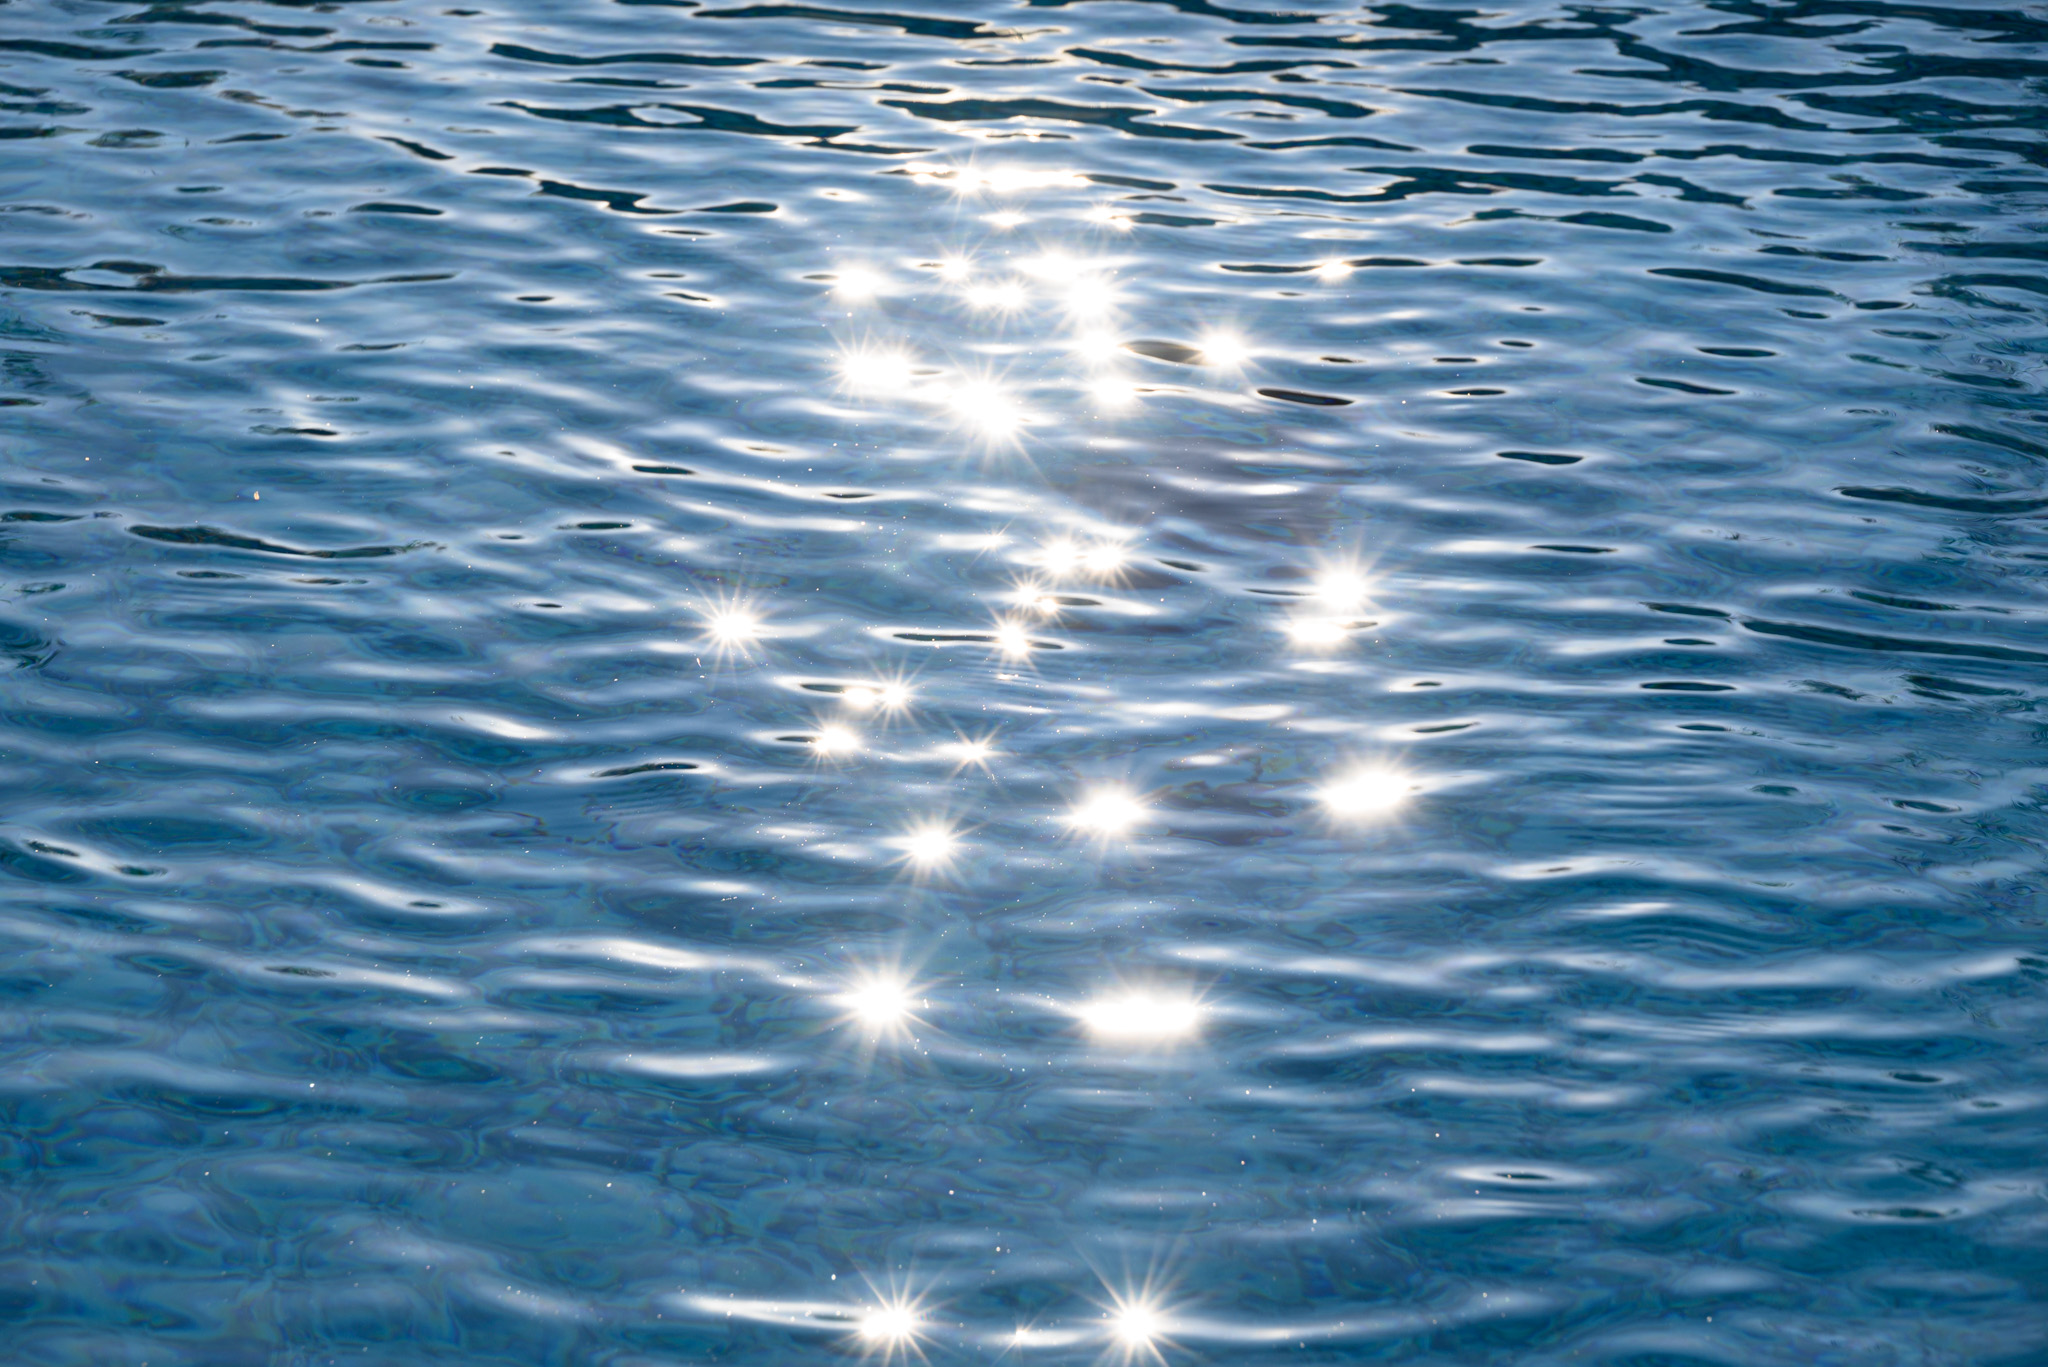 Sunlight glints across the blue water of a pool making multiple starbursts that appear to float in the air